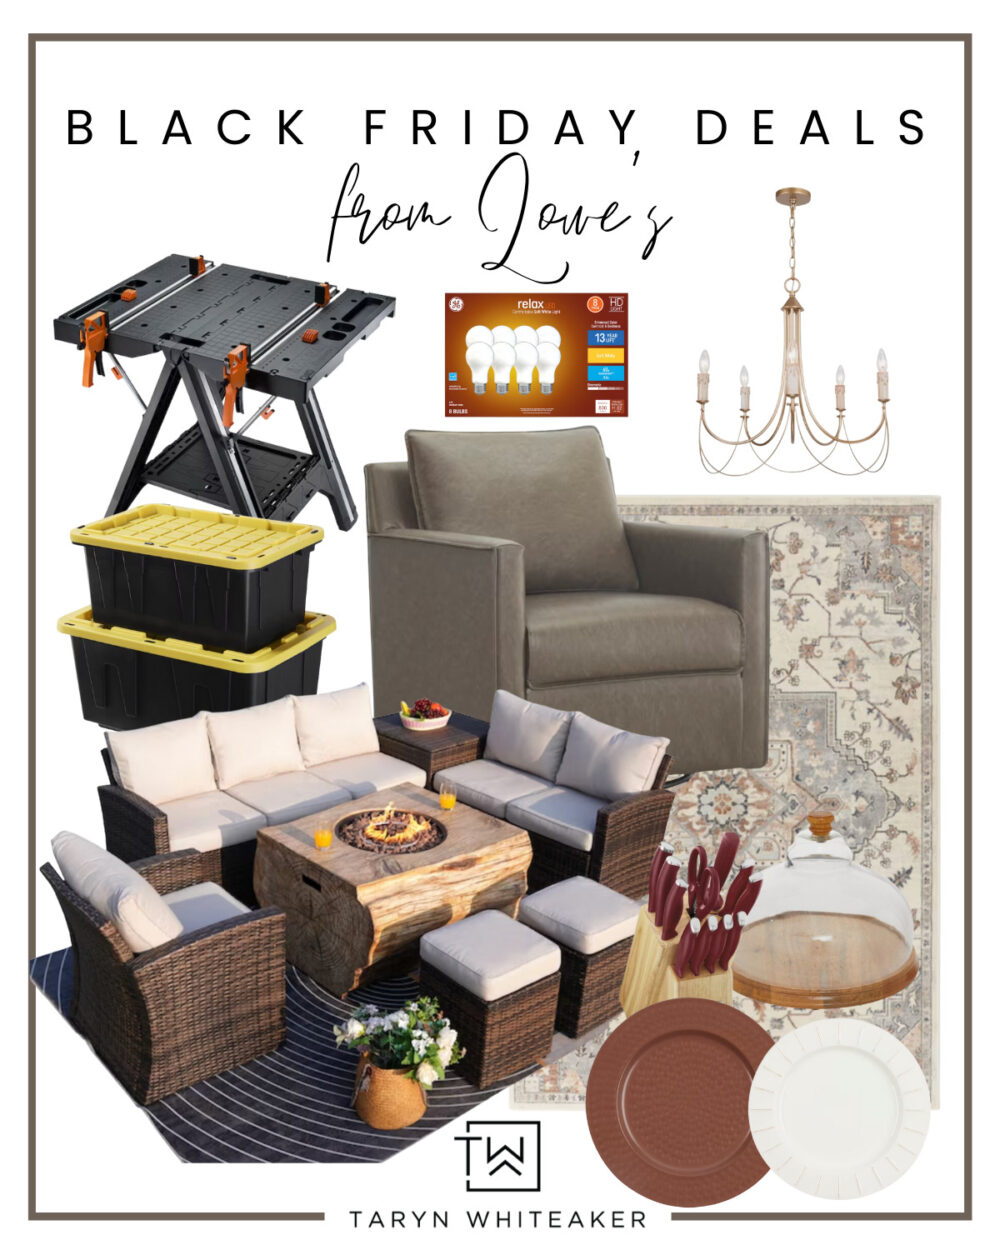 black friday, cyber monday, taryn whiteaker, home designs, shopping finds, black friday deals, cyber monday deals